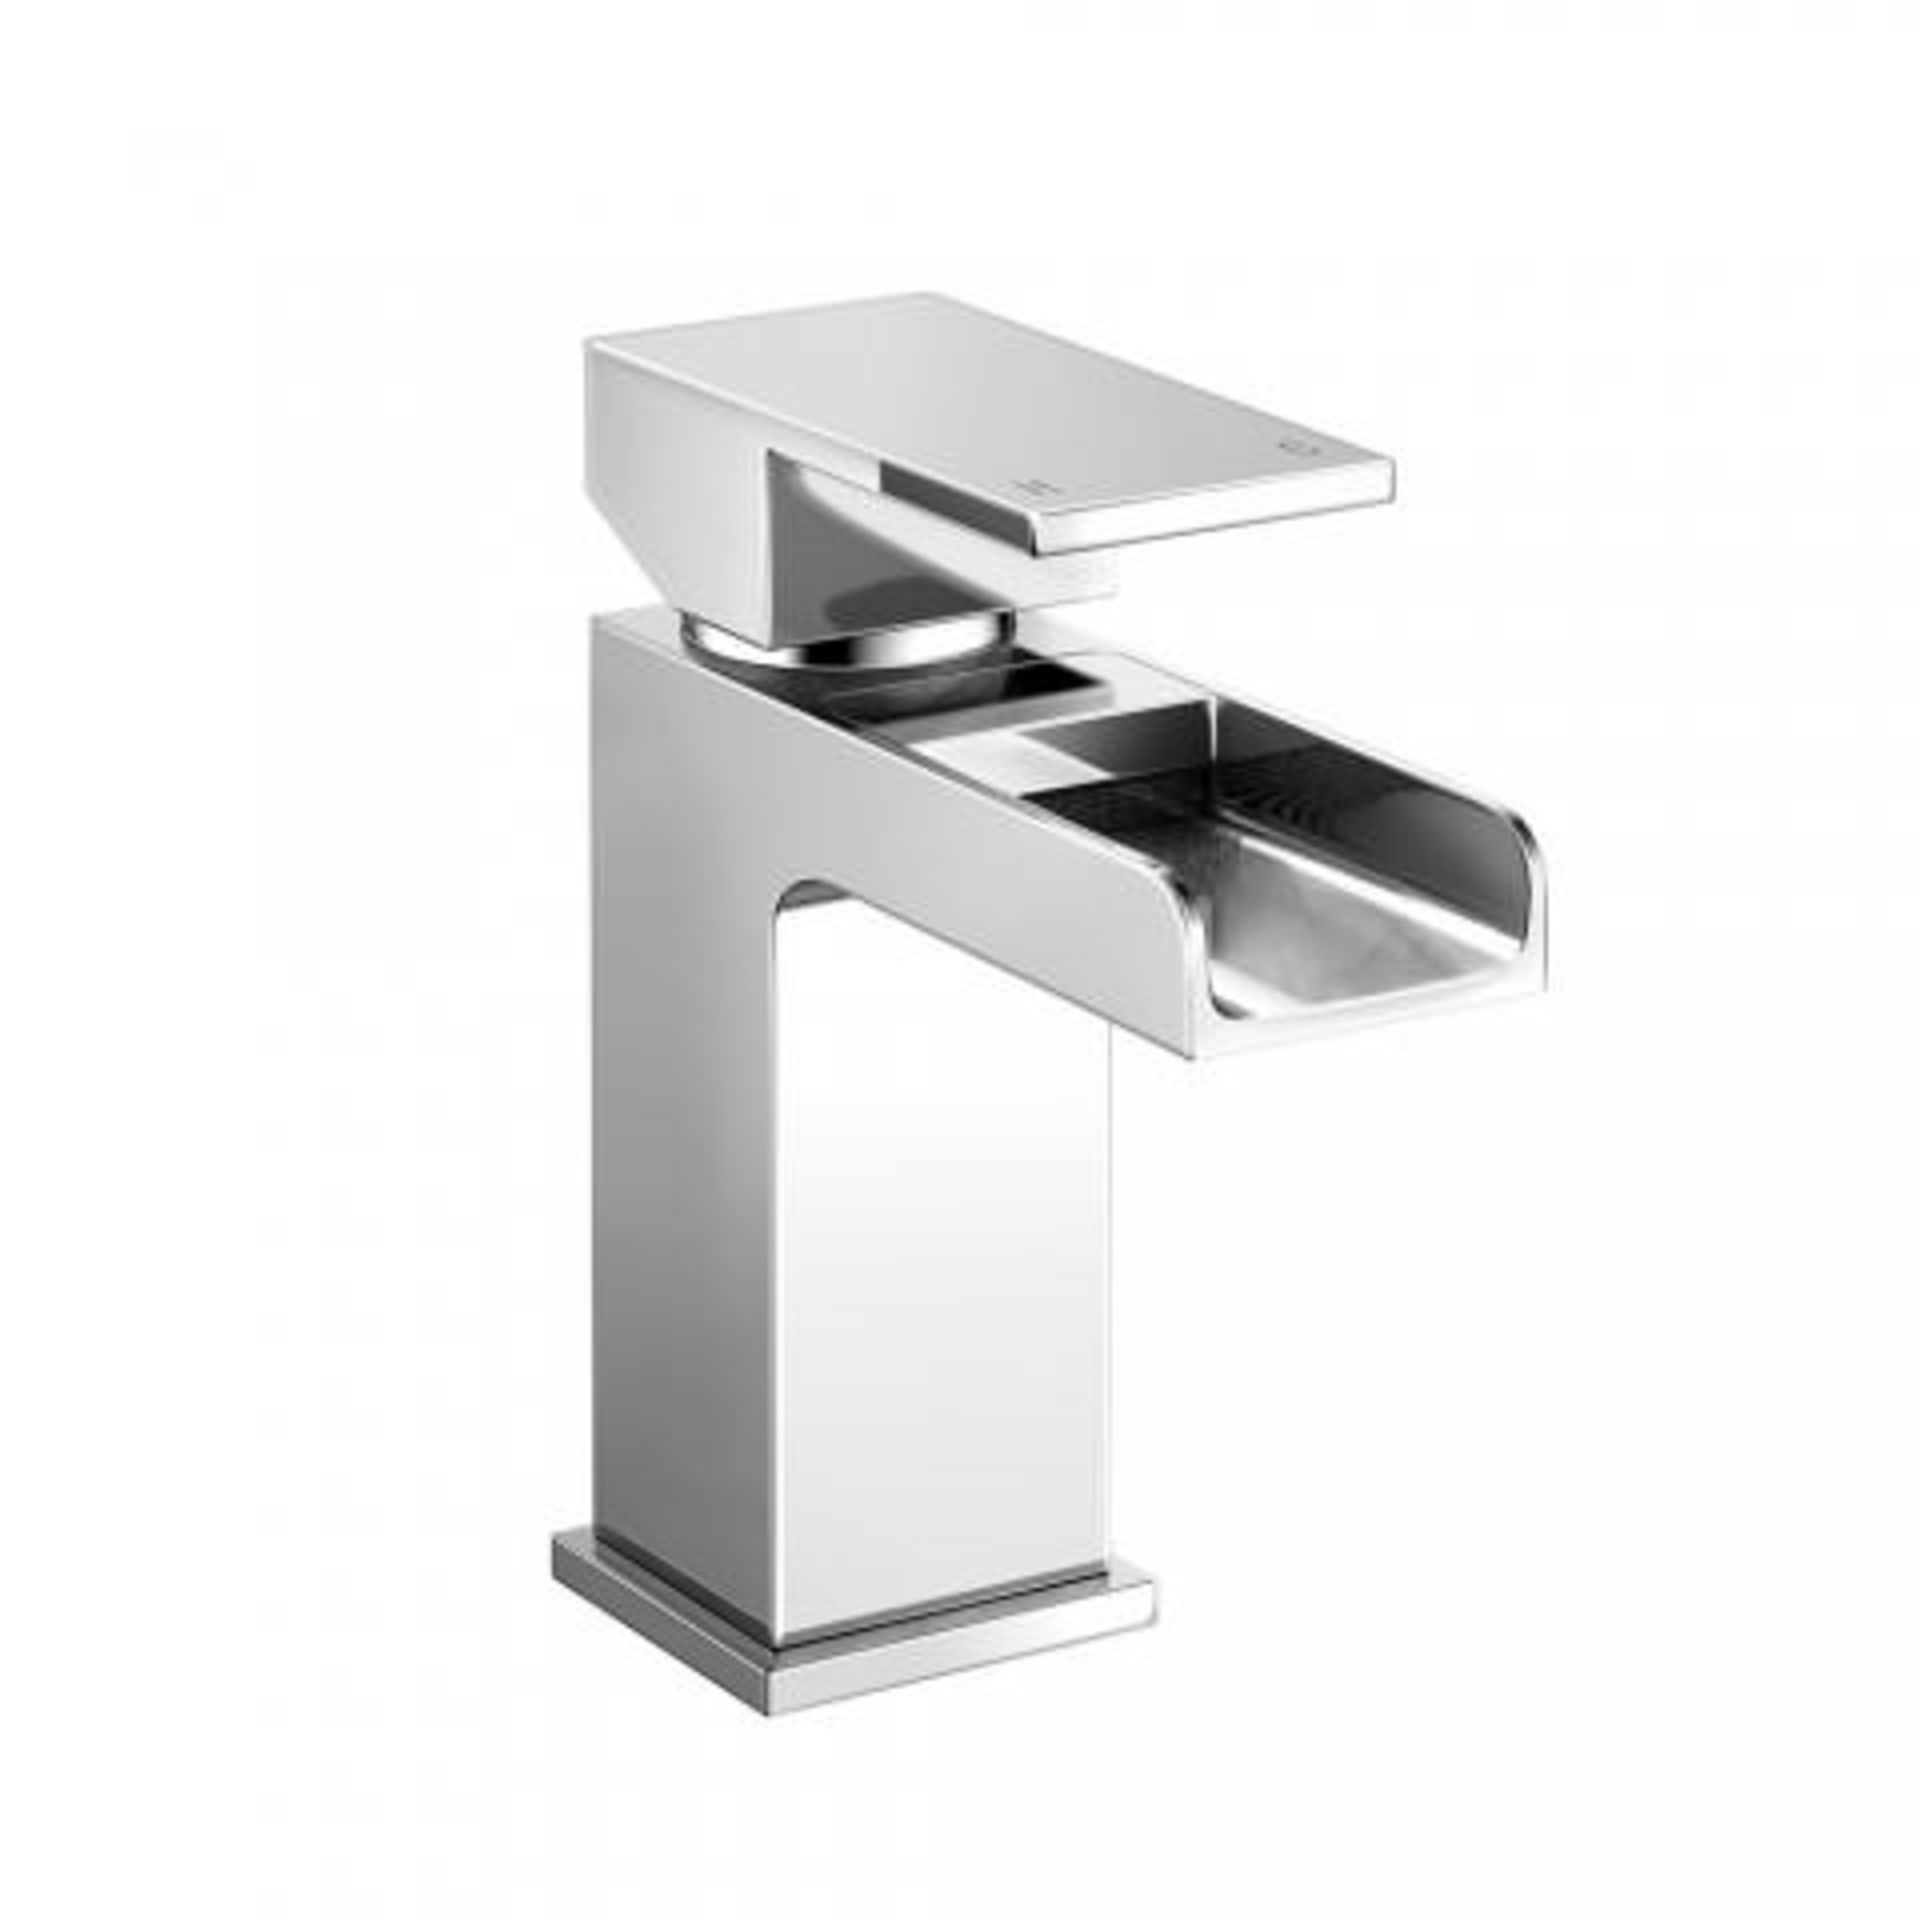 (A32) Niagra II Basin Mixer Tap Waterfall Feature Our range of waterfall taps add a contemporary - Bild 2 aus 3